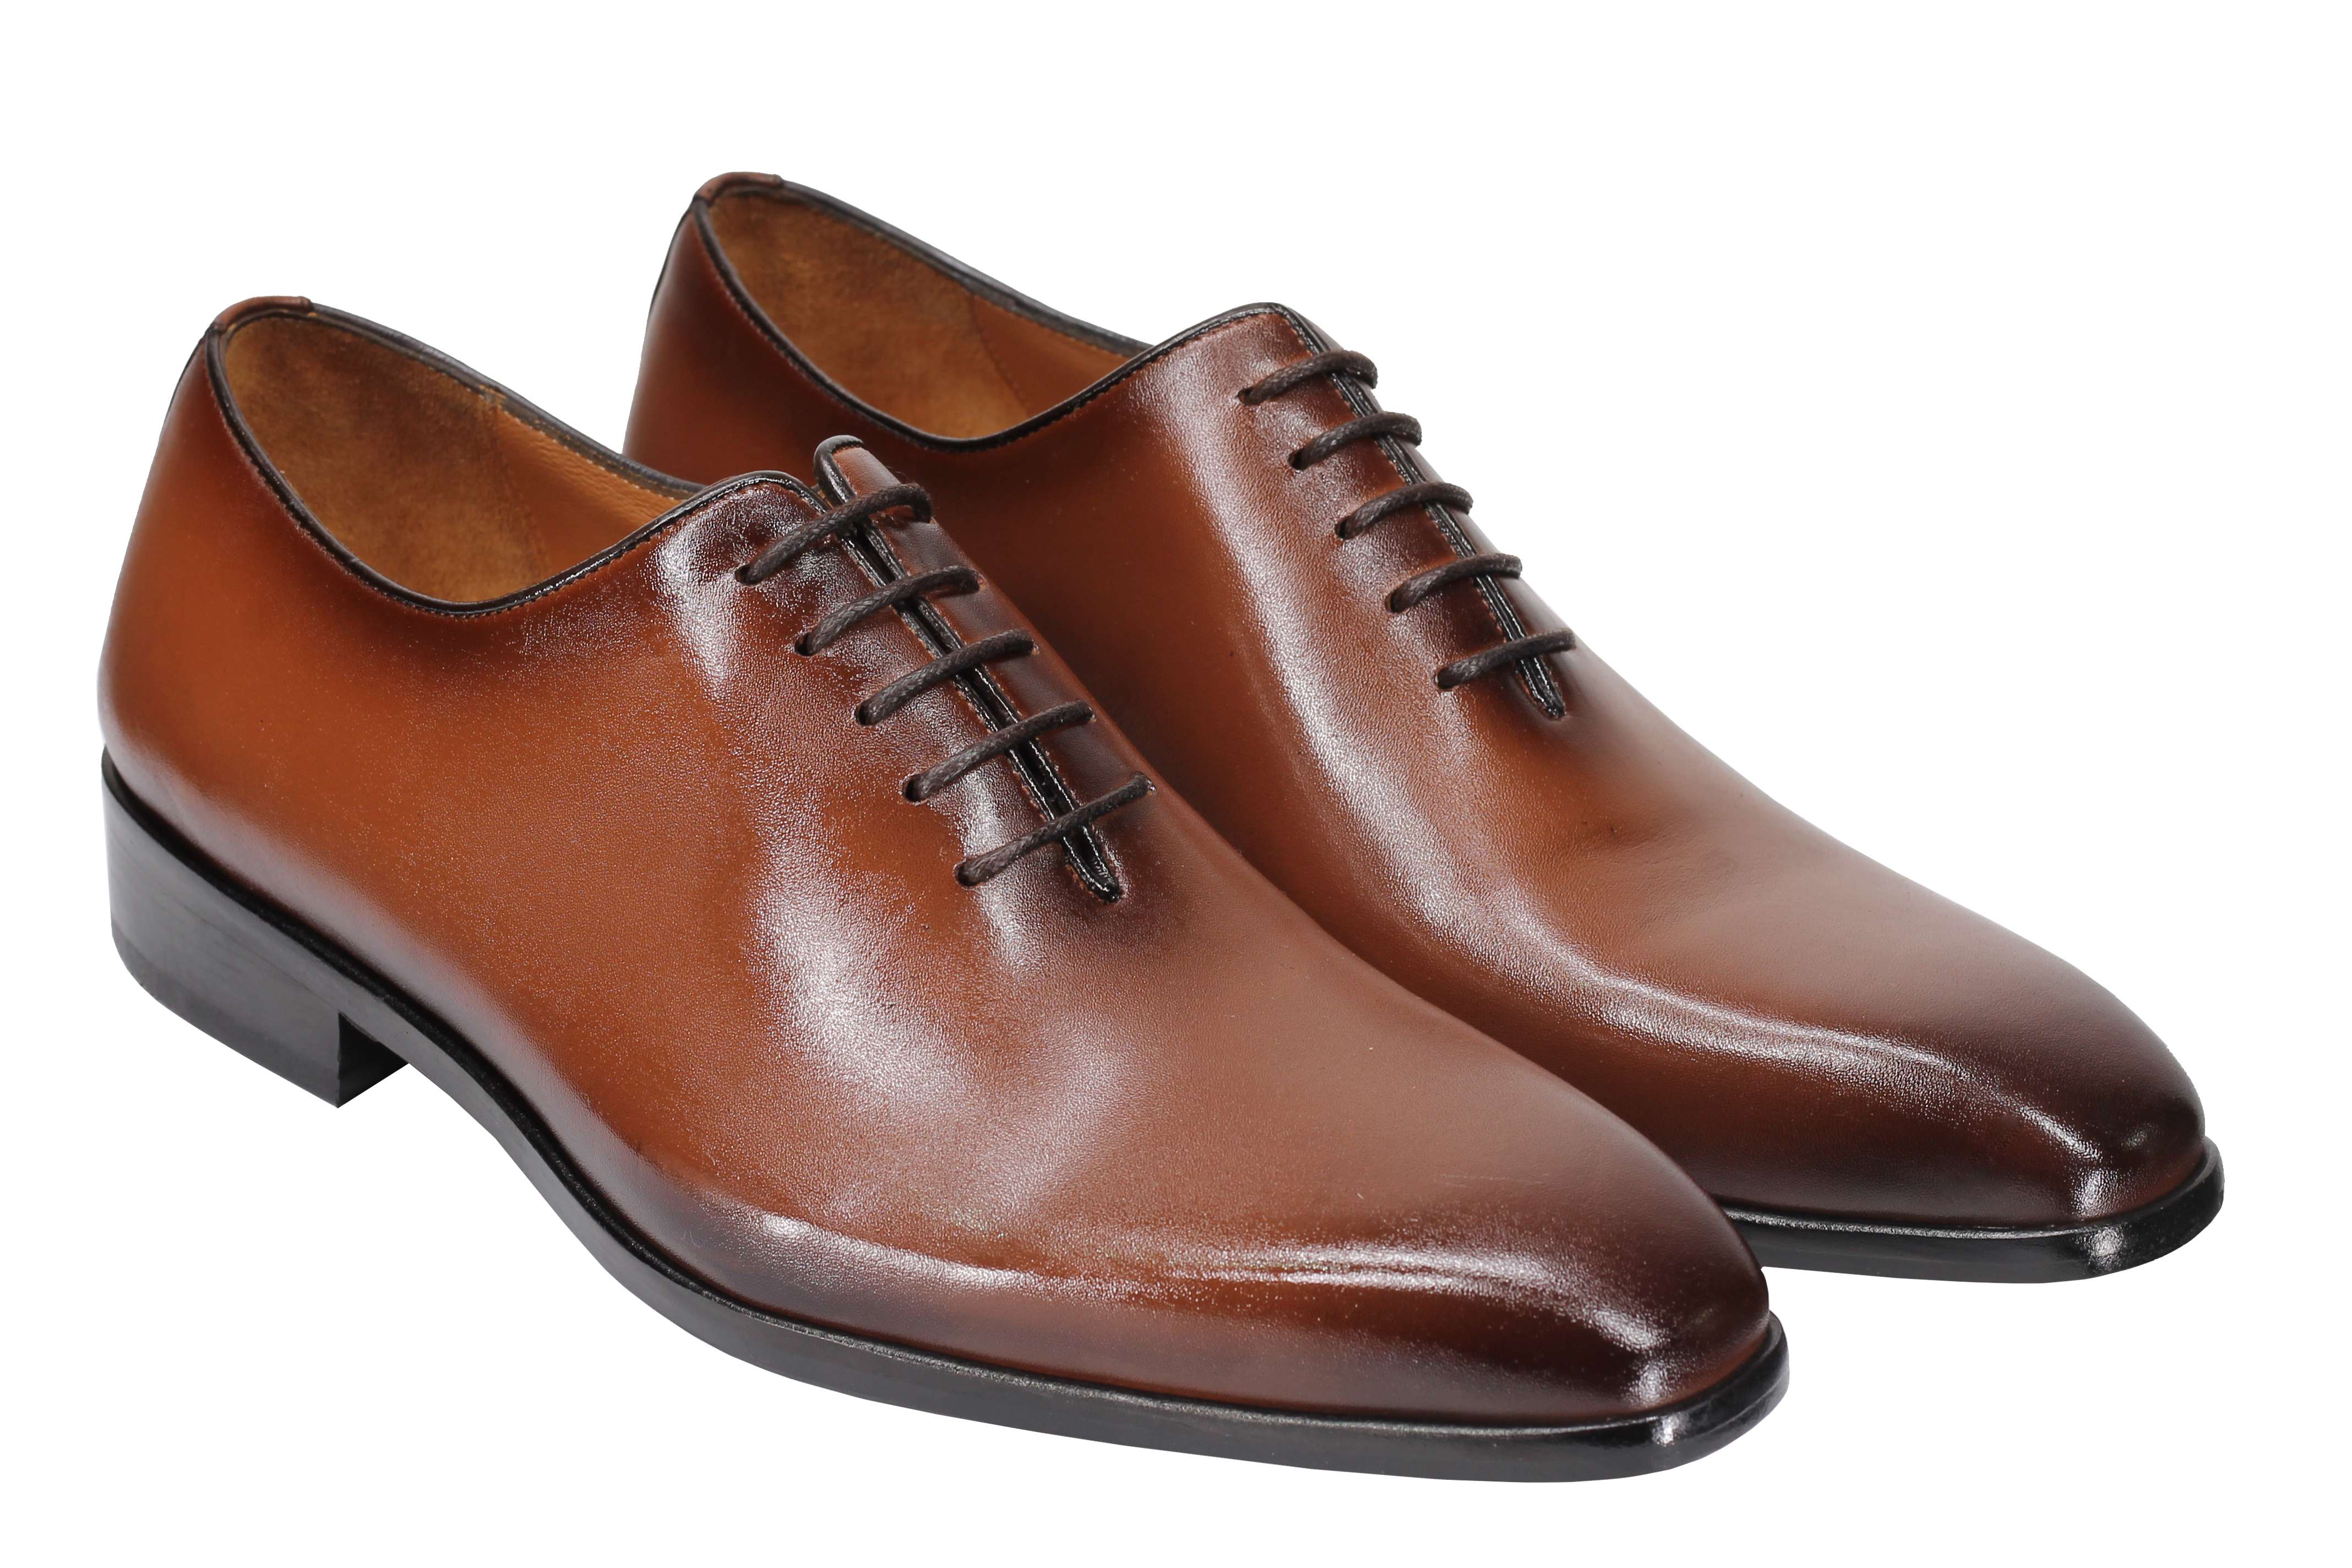 TAN CALF LEATHER WHOLECUT OXFORD LACE UP SHOES